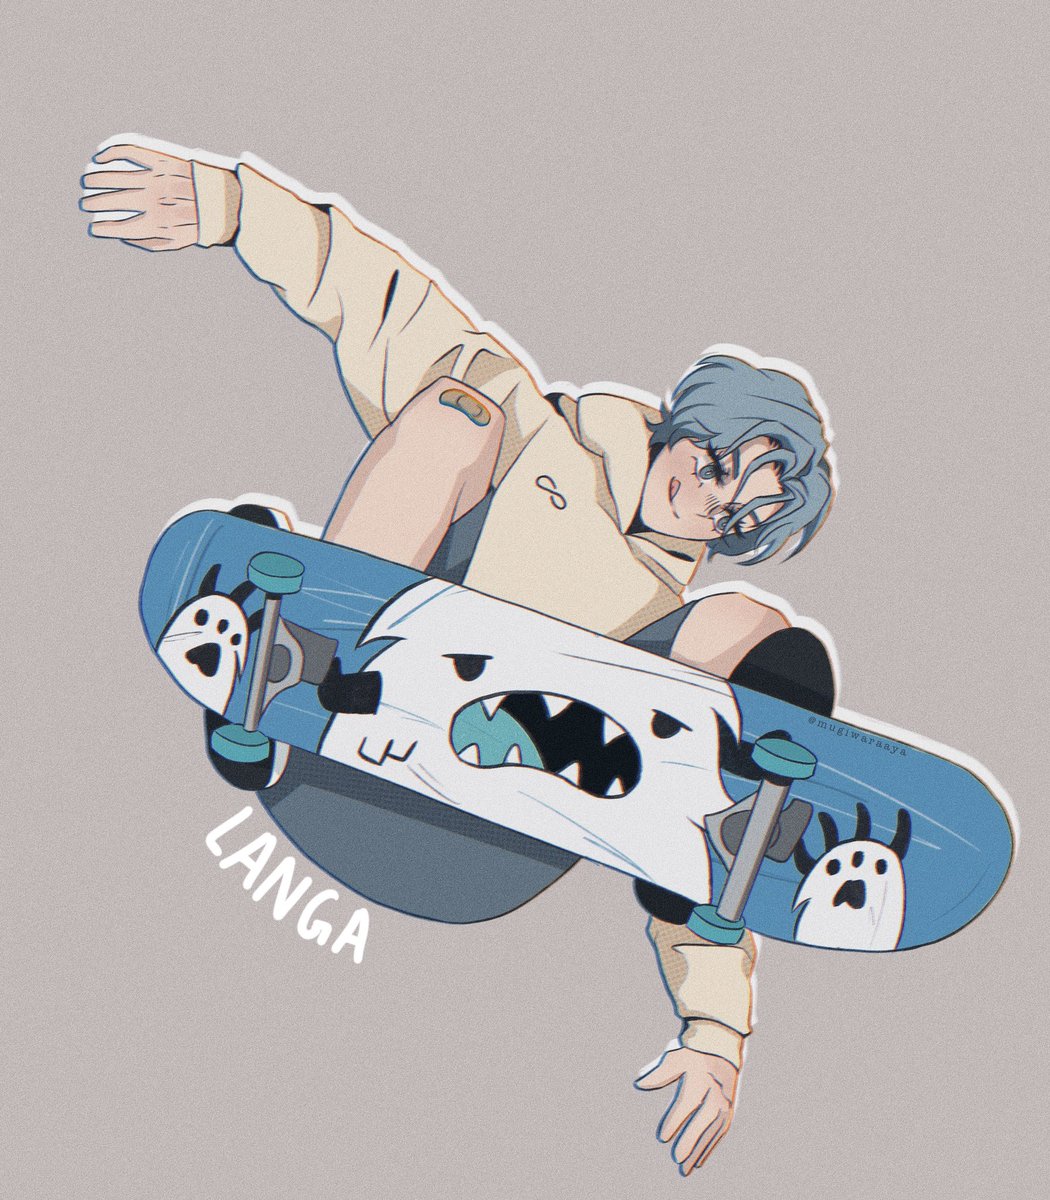 「renga + a happy langa
#sk8theinfinity 」|cat 🪴 @ uni/comms/mailing ordersのイラスト